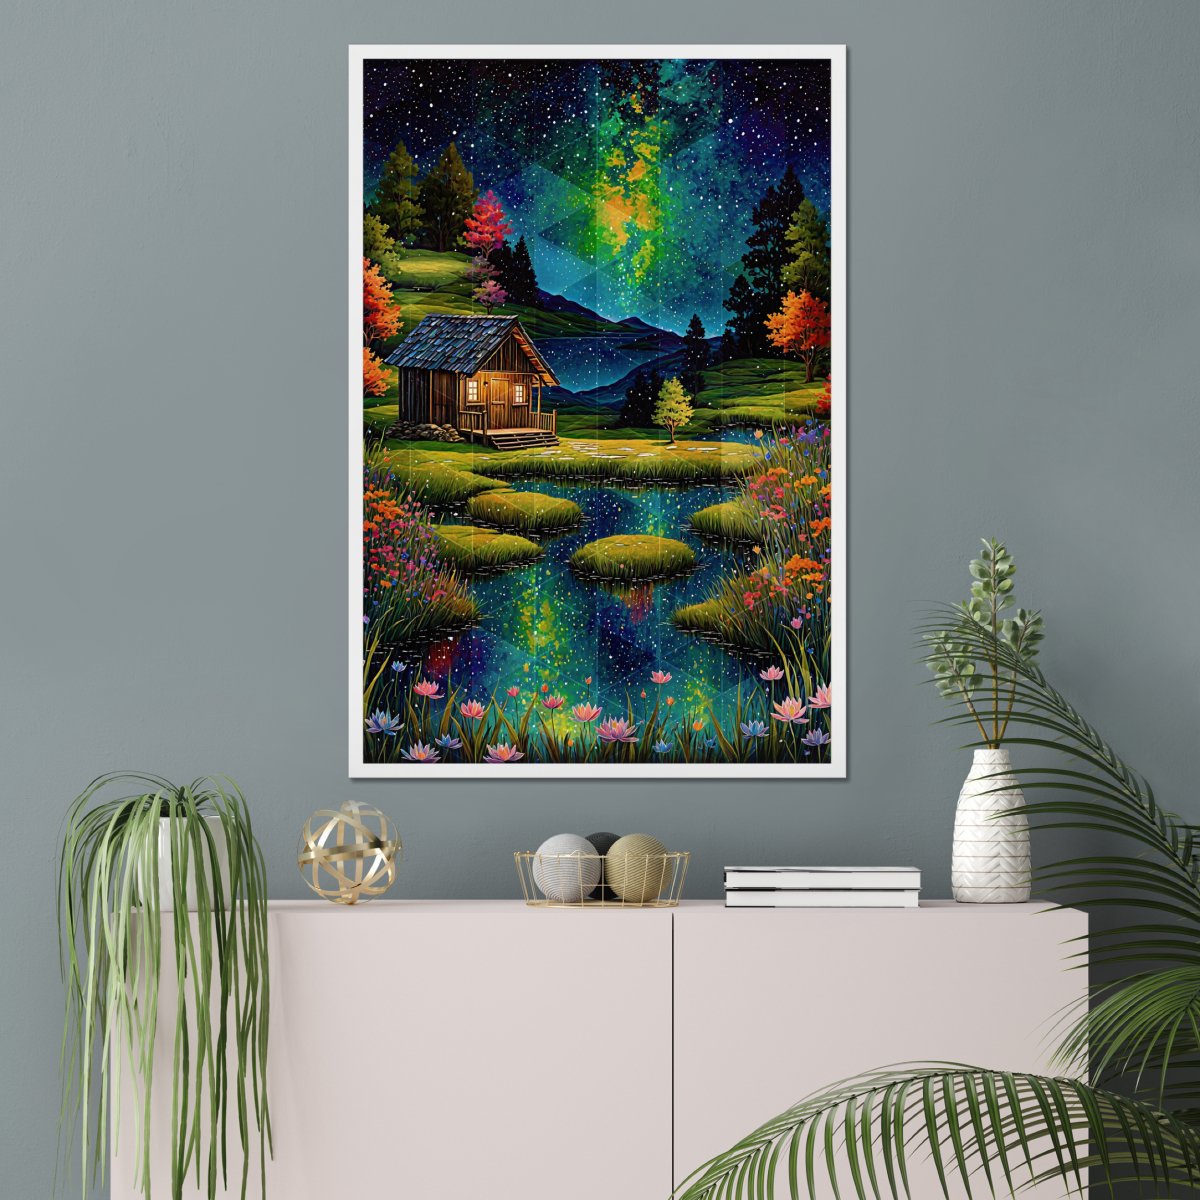 Floral pond of stars - Art print - Poster - Ever colorful